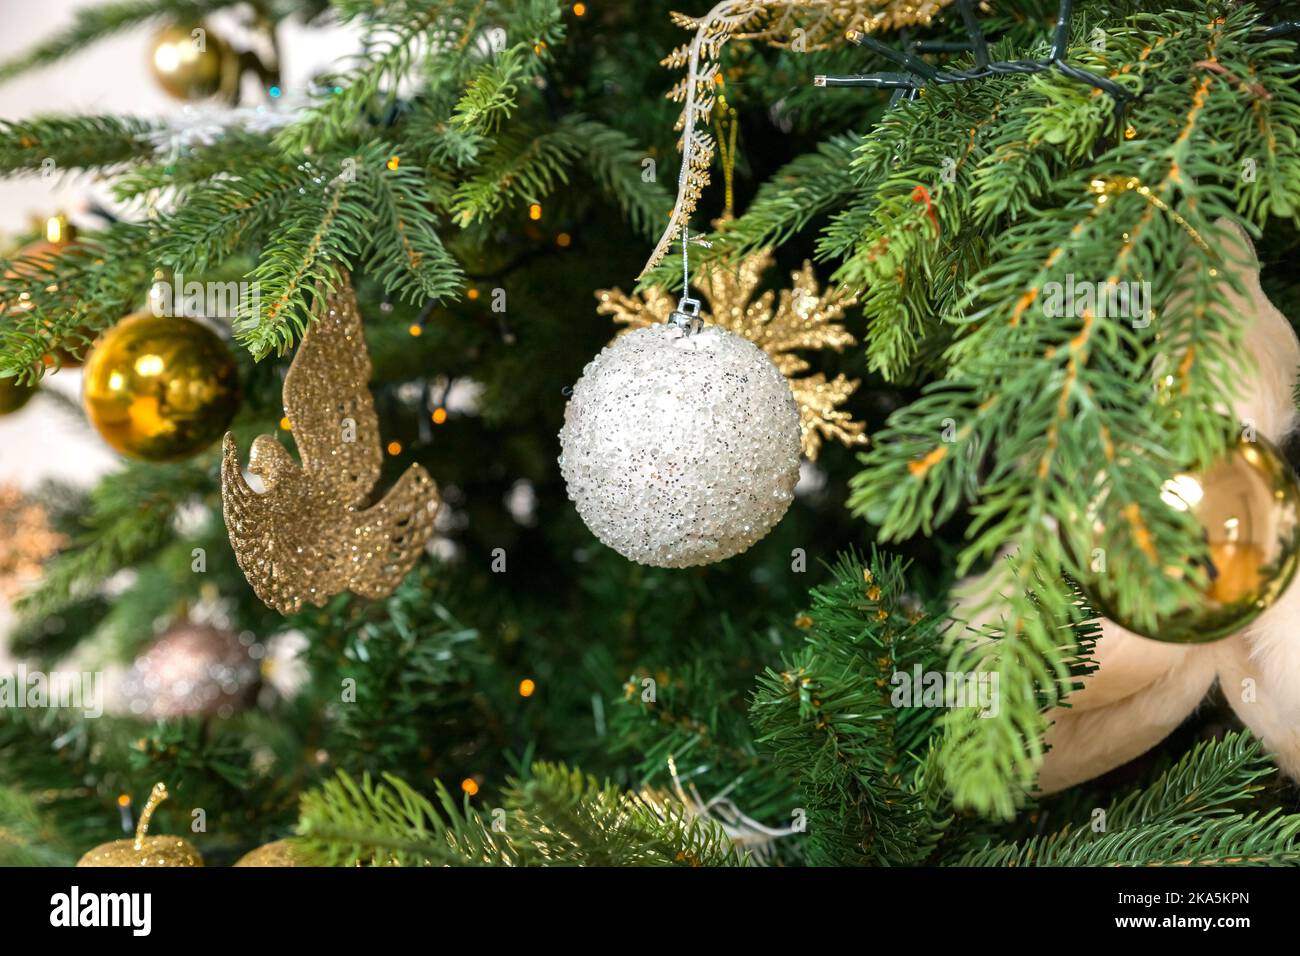 Christmas decoration. white and golden balls hanging on pine branches  Christmas tree, garland and ornaments.celebrate the christmas season with  Stock Photo - Alamy